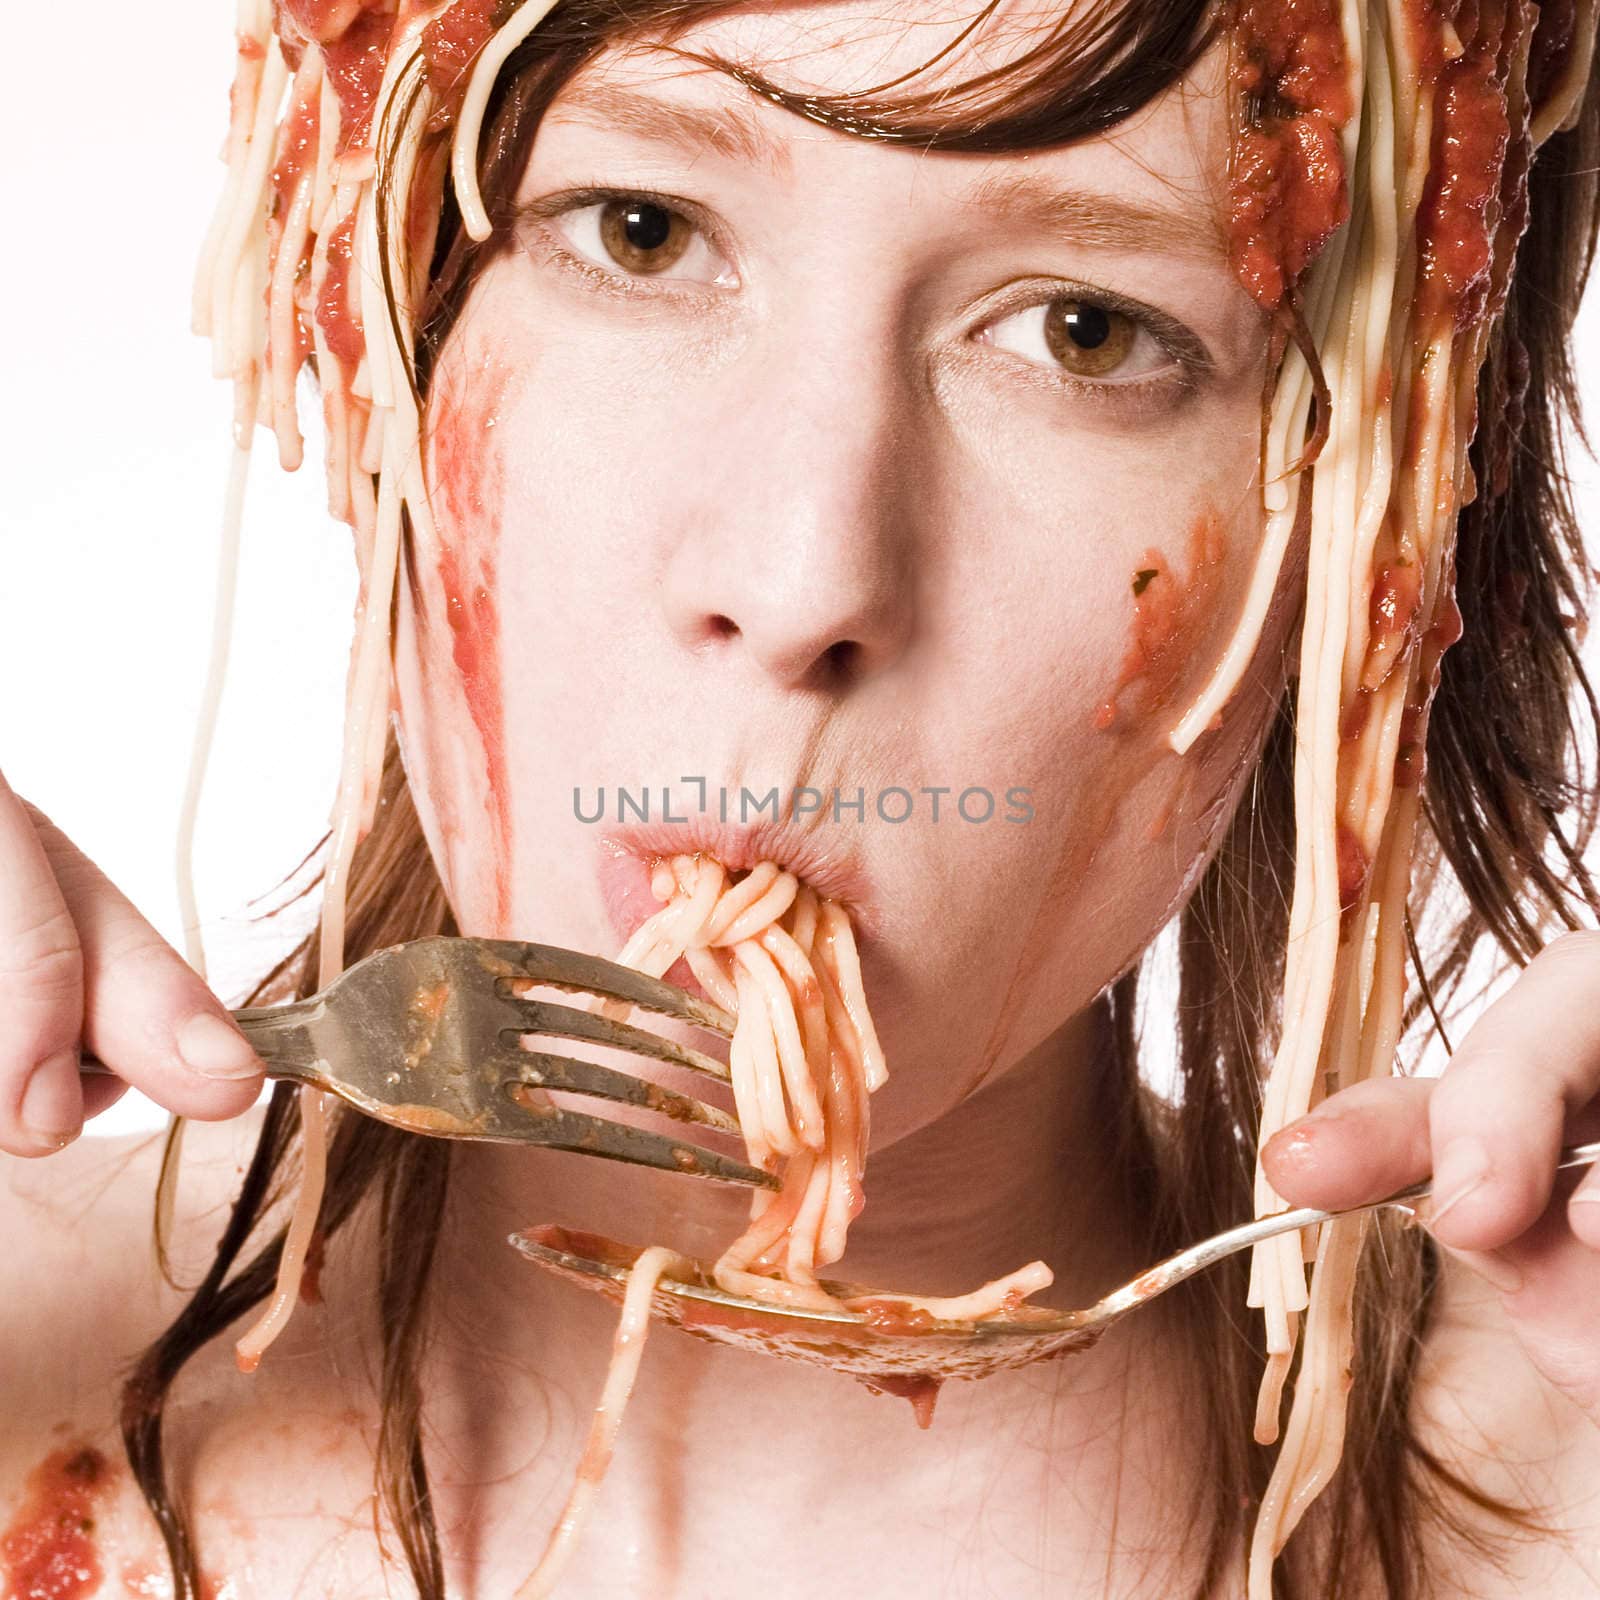 Red haired girl with a meal of spaghetti on her head eating